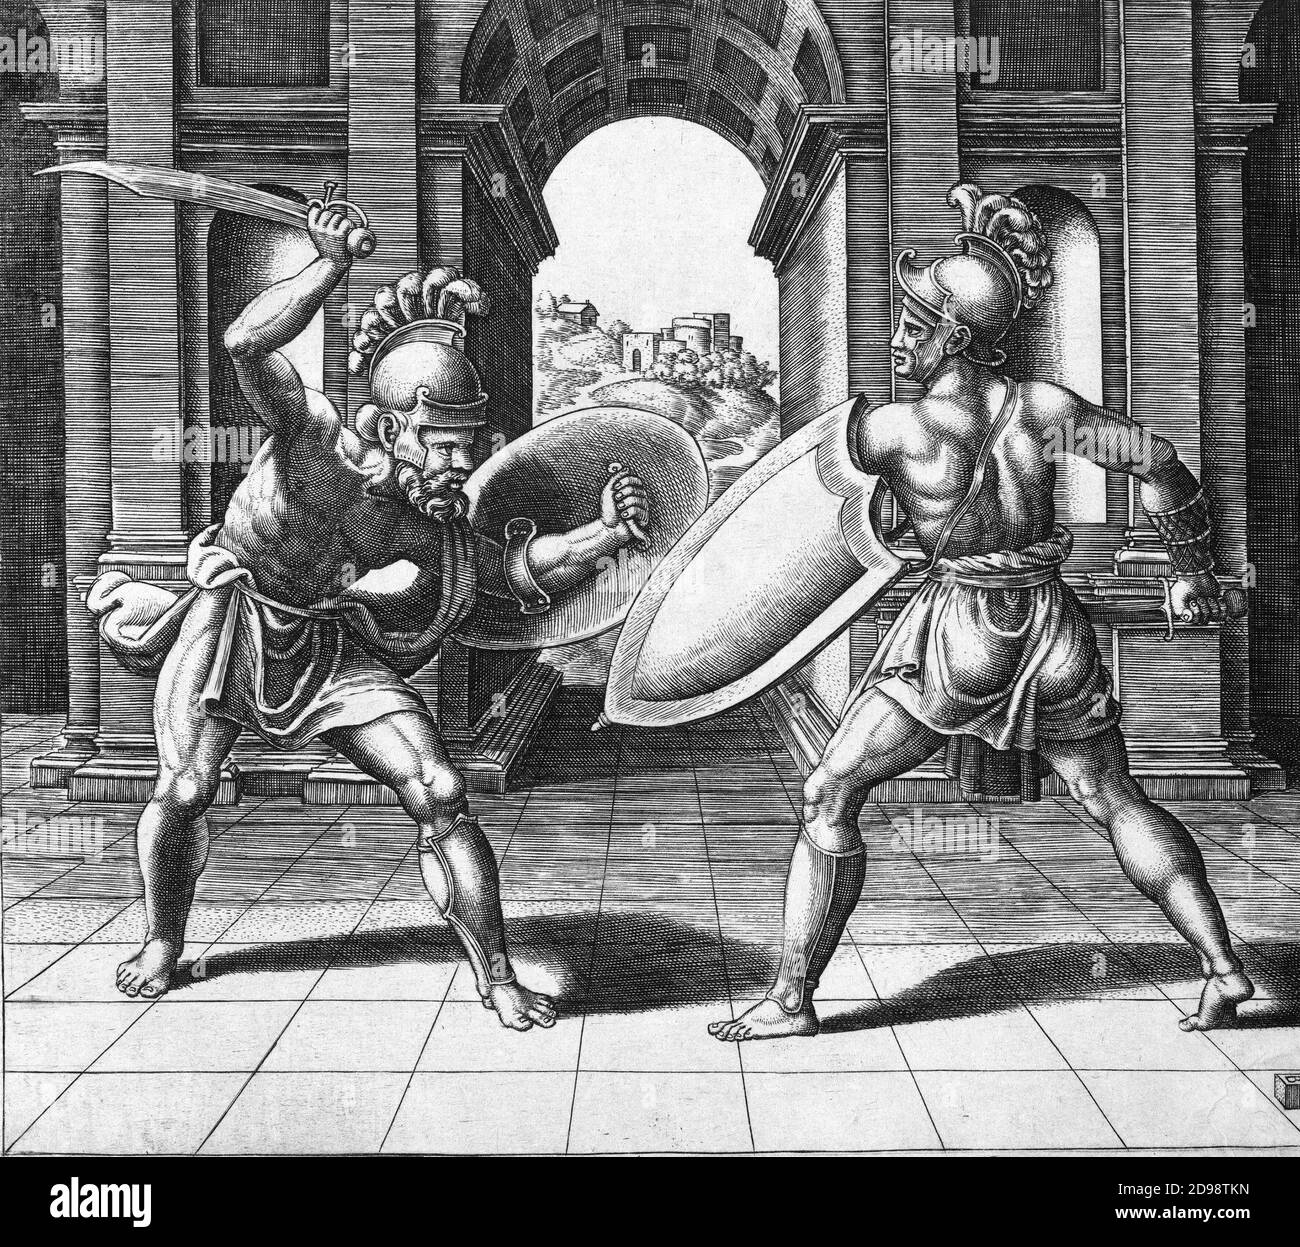 Roman Gladiator. Engraving entitled 'Two Gladiators Fighting in front of an Arch' by Master of the Die, c. 1530-60 Stock Photo